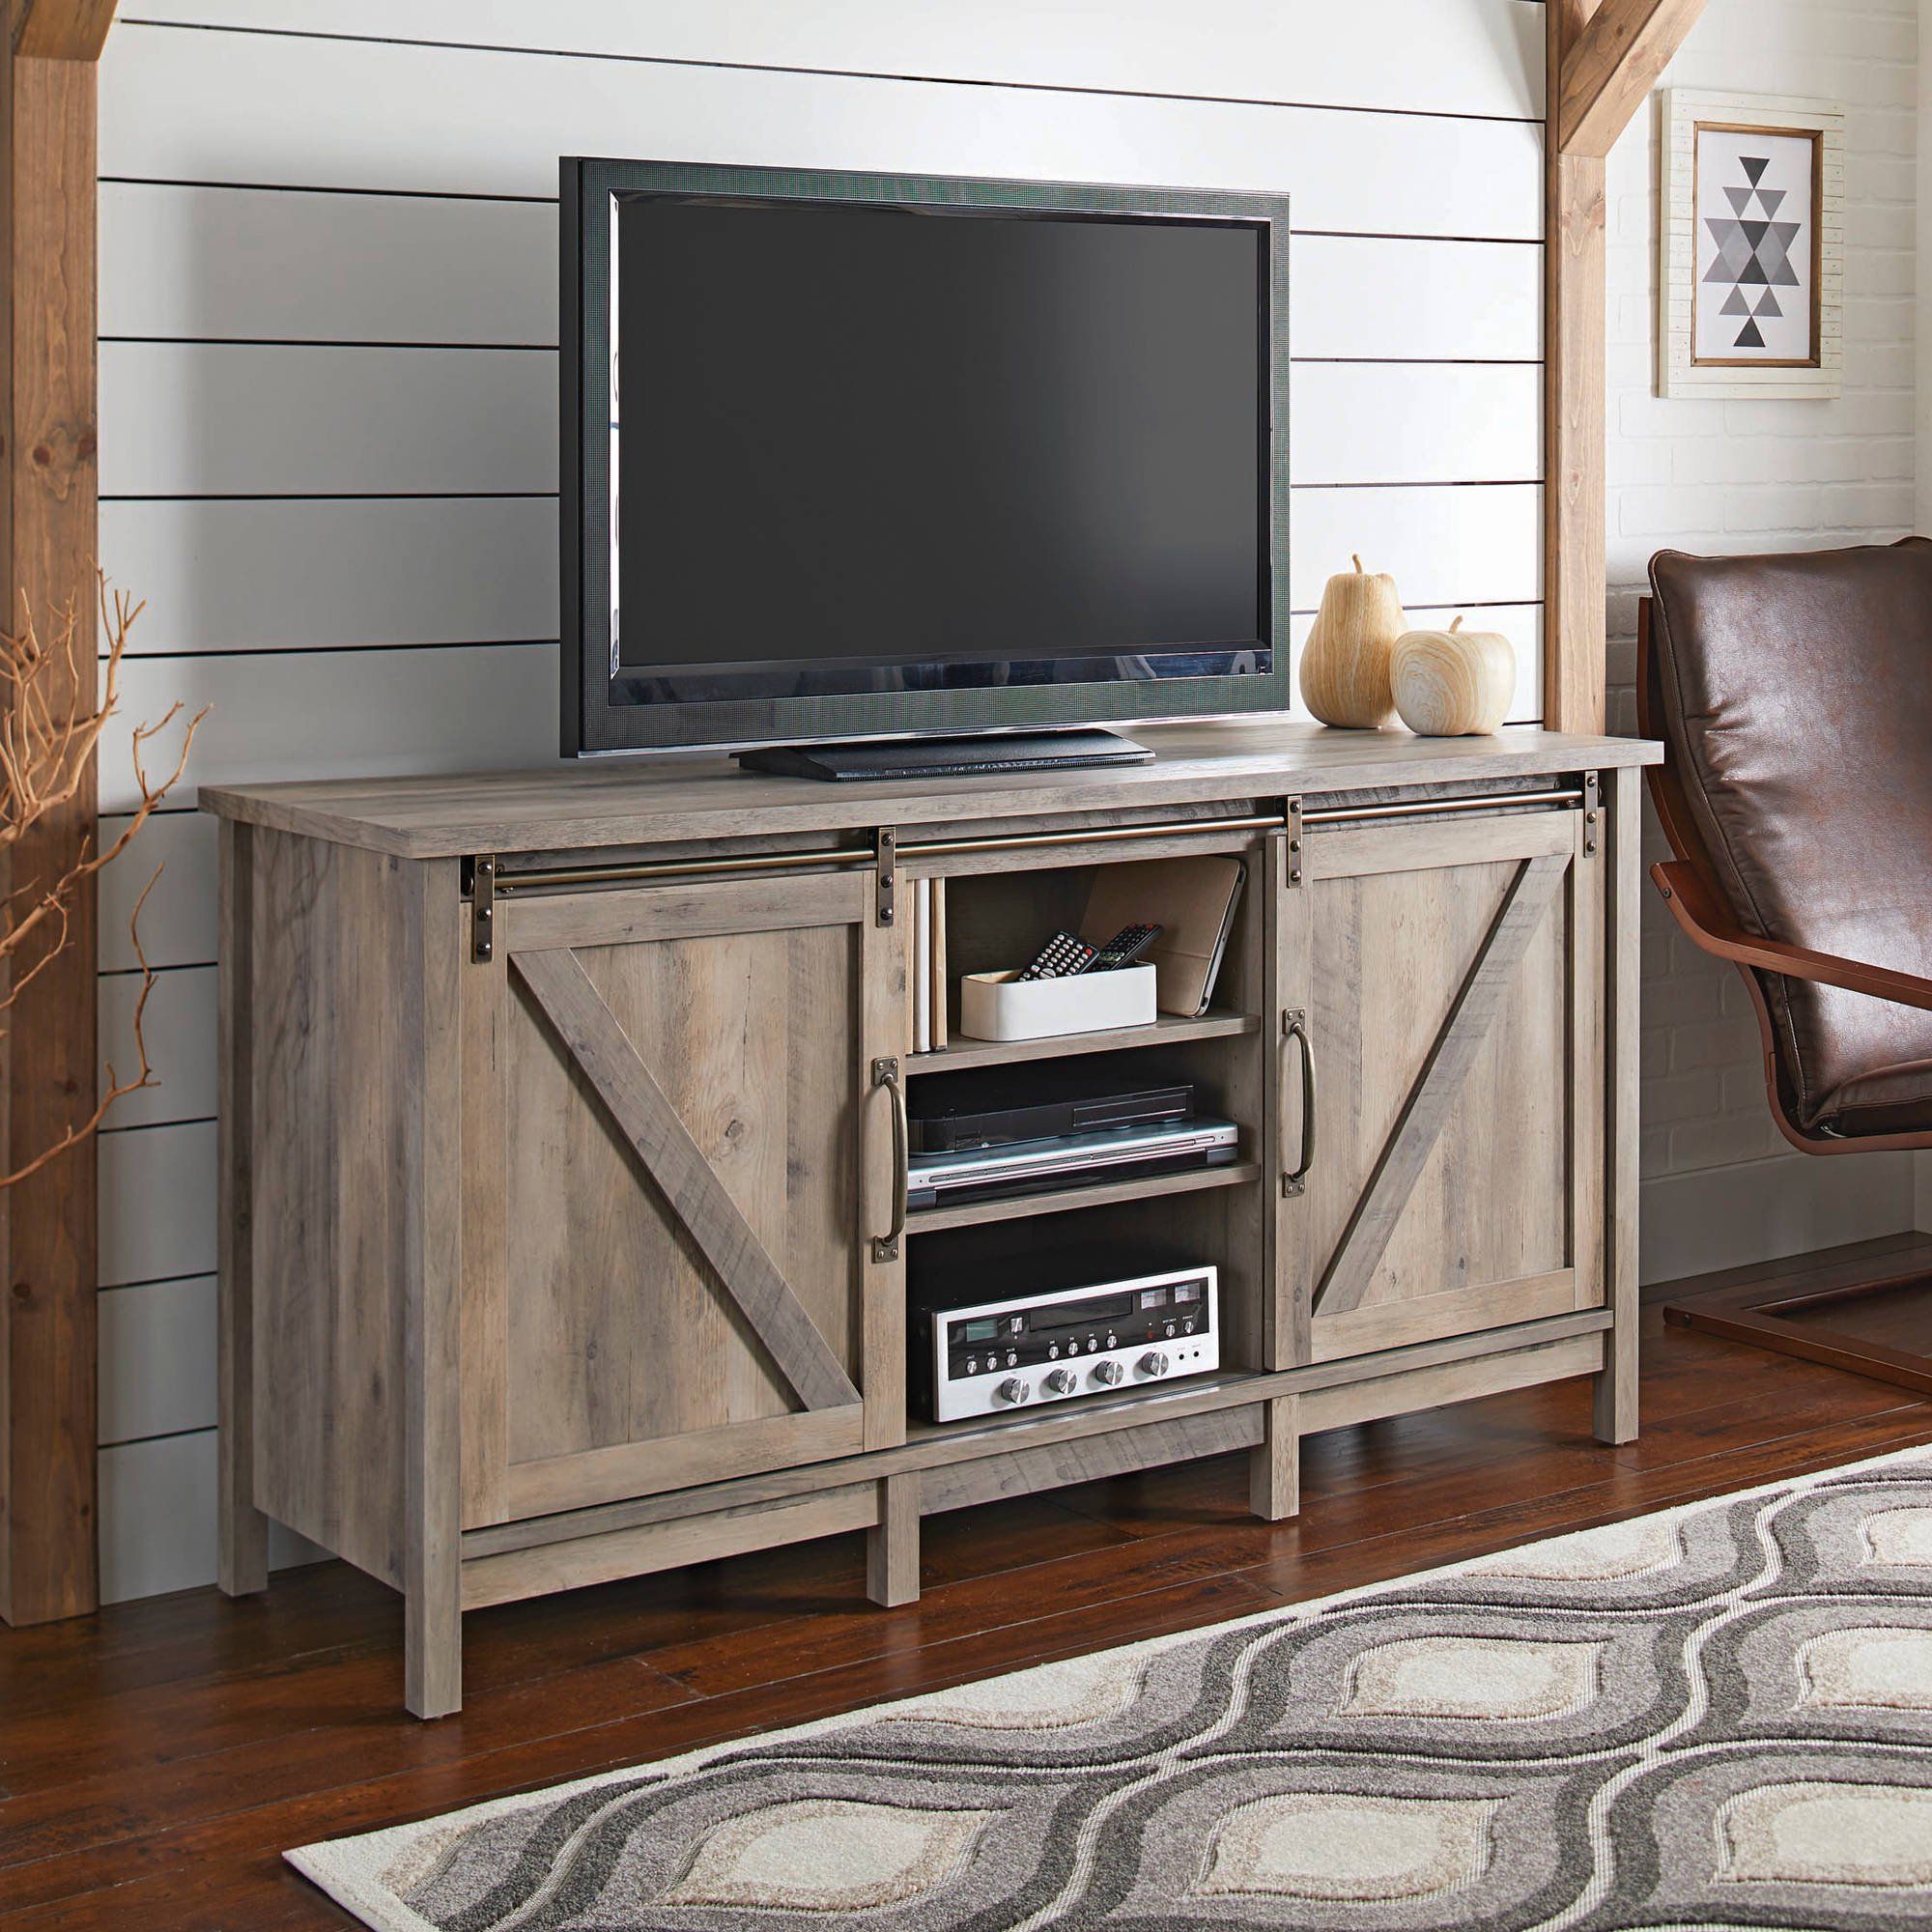 Most Recent Farmhouse Stand, Rustic Tv Stand, Modern Tv Stand, Modern Farmhouse In Modern Farmhouse Rustic Tv Stands (Photo 6 of 15)